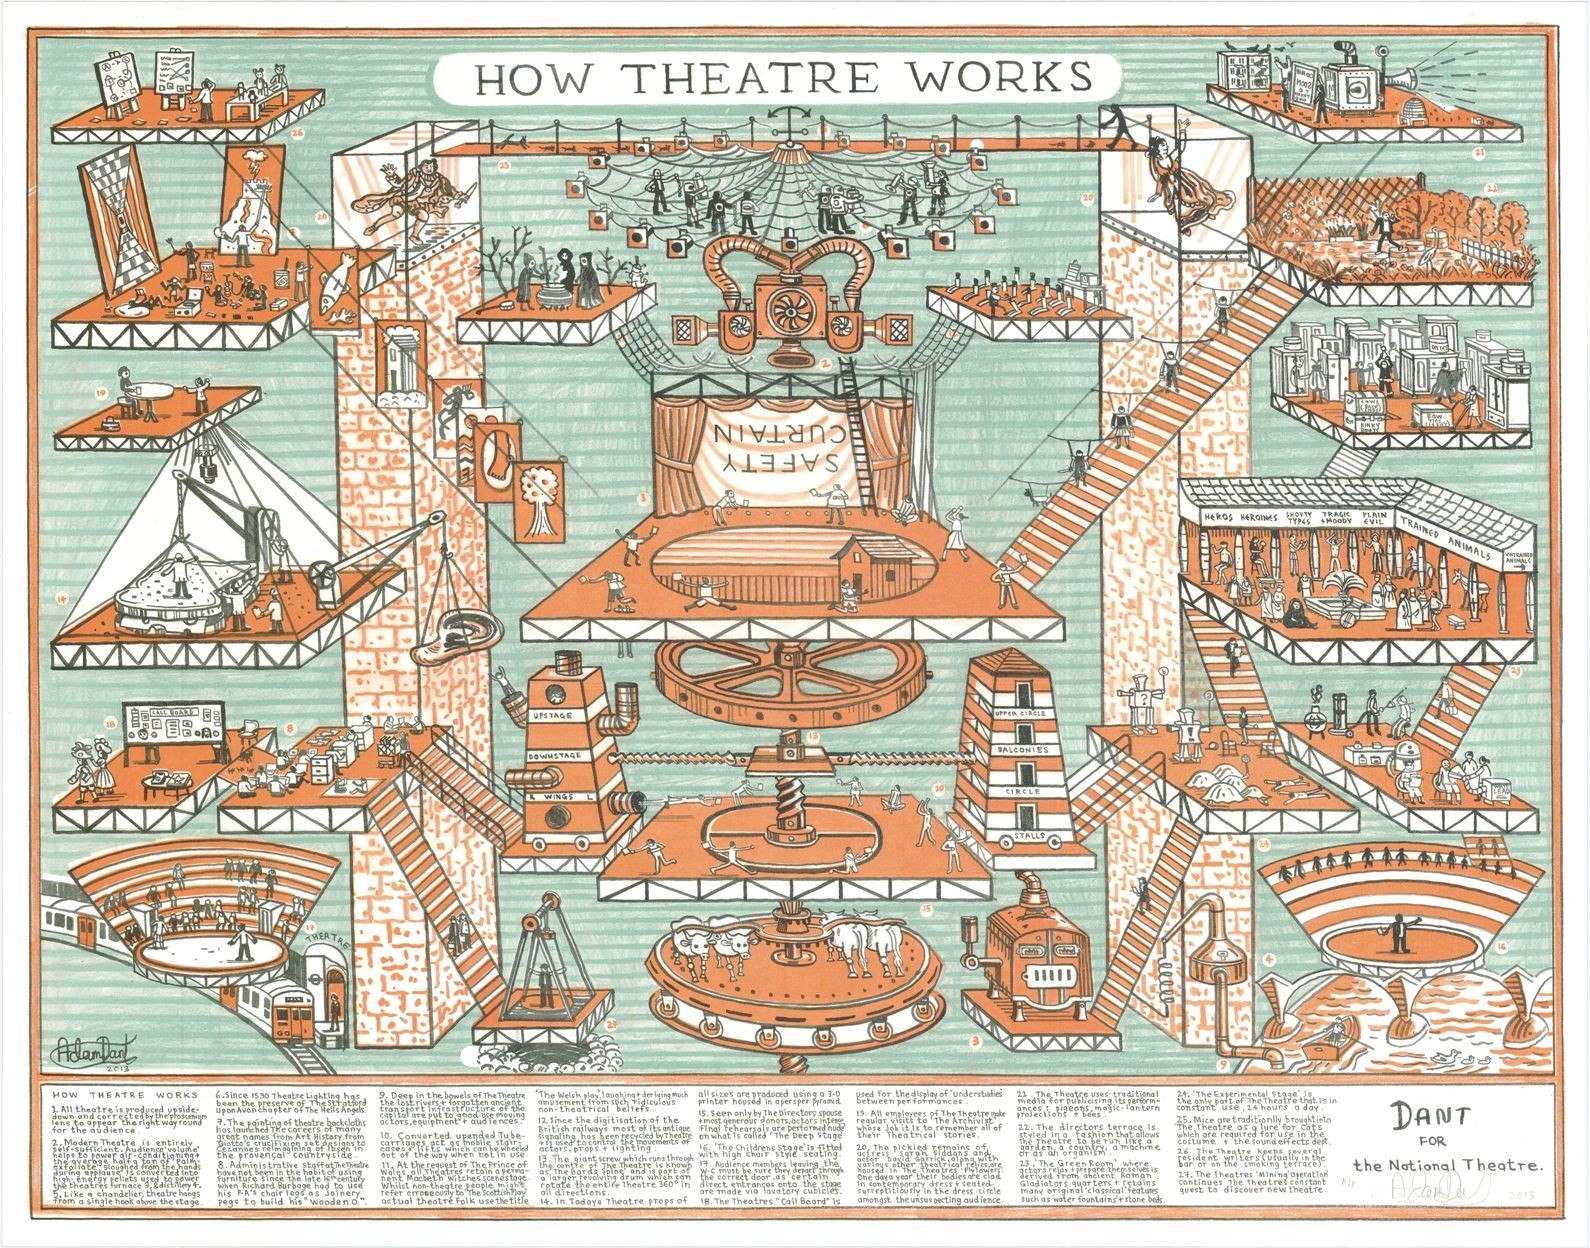 dant_-_how_the_theatre_works_courtesy_of_tag_fine_arts.jpg